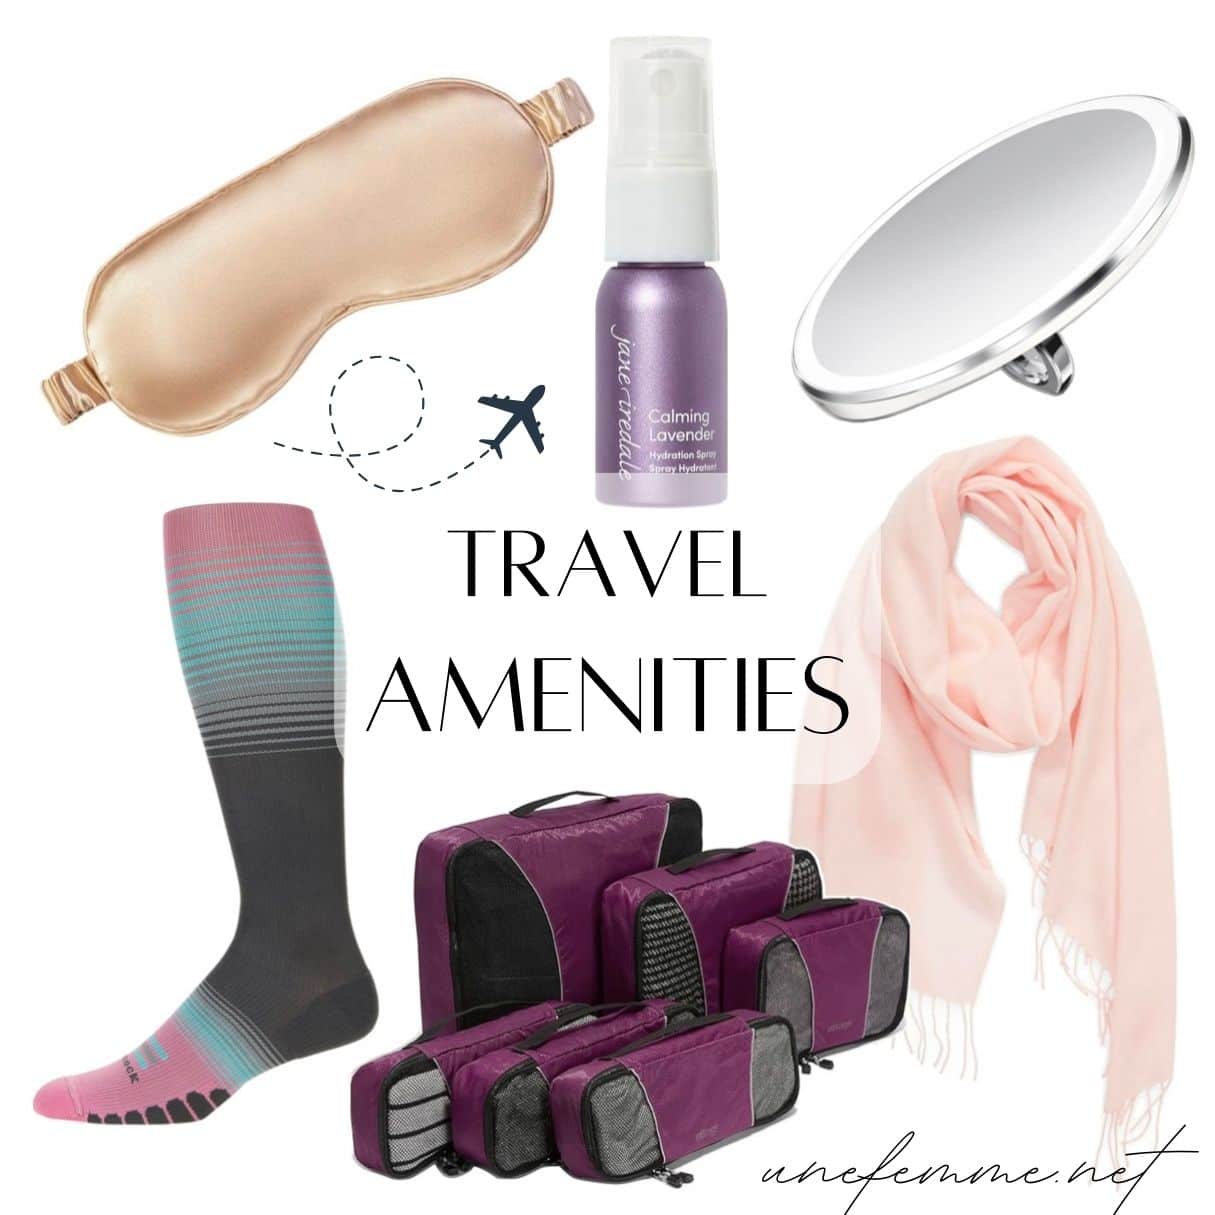 You’ve been upgraded: 6 travel amenities to make your trip more enjoyable